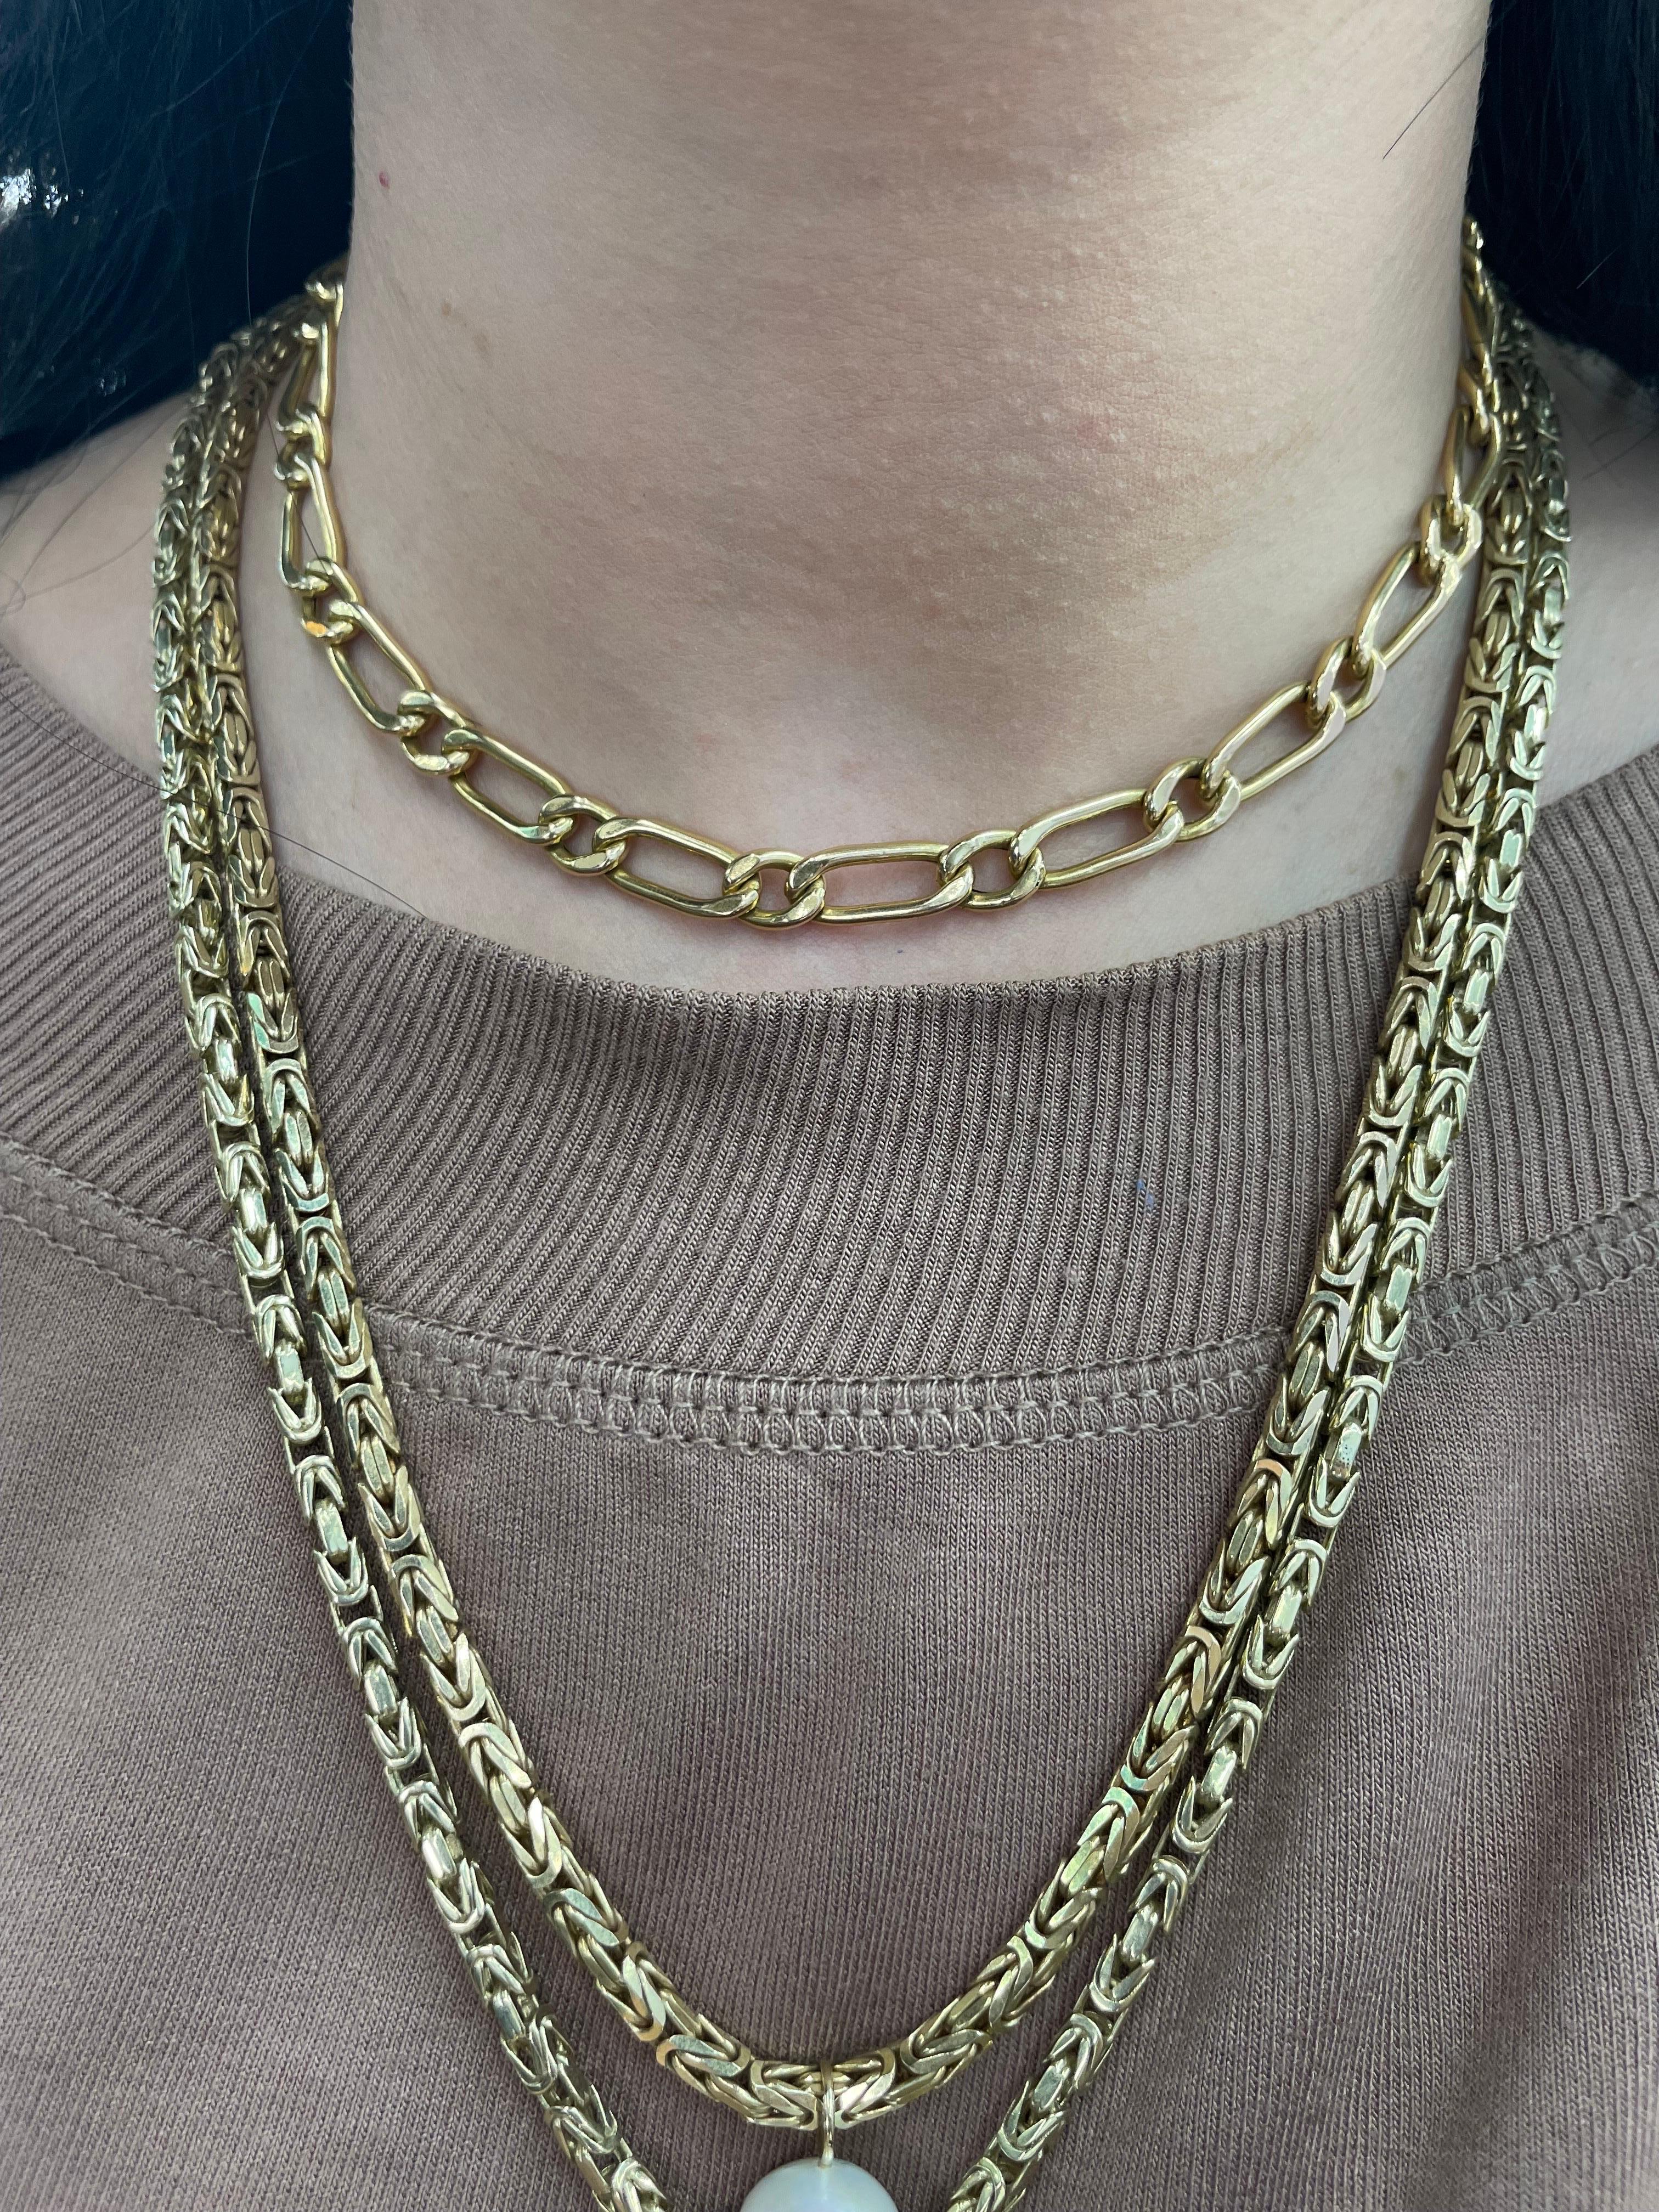 15 inch necklace